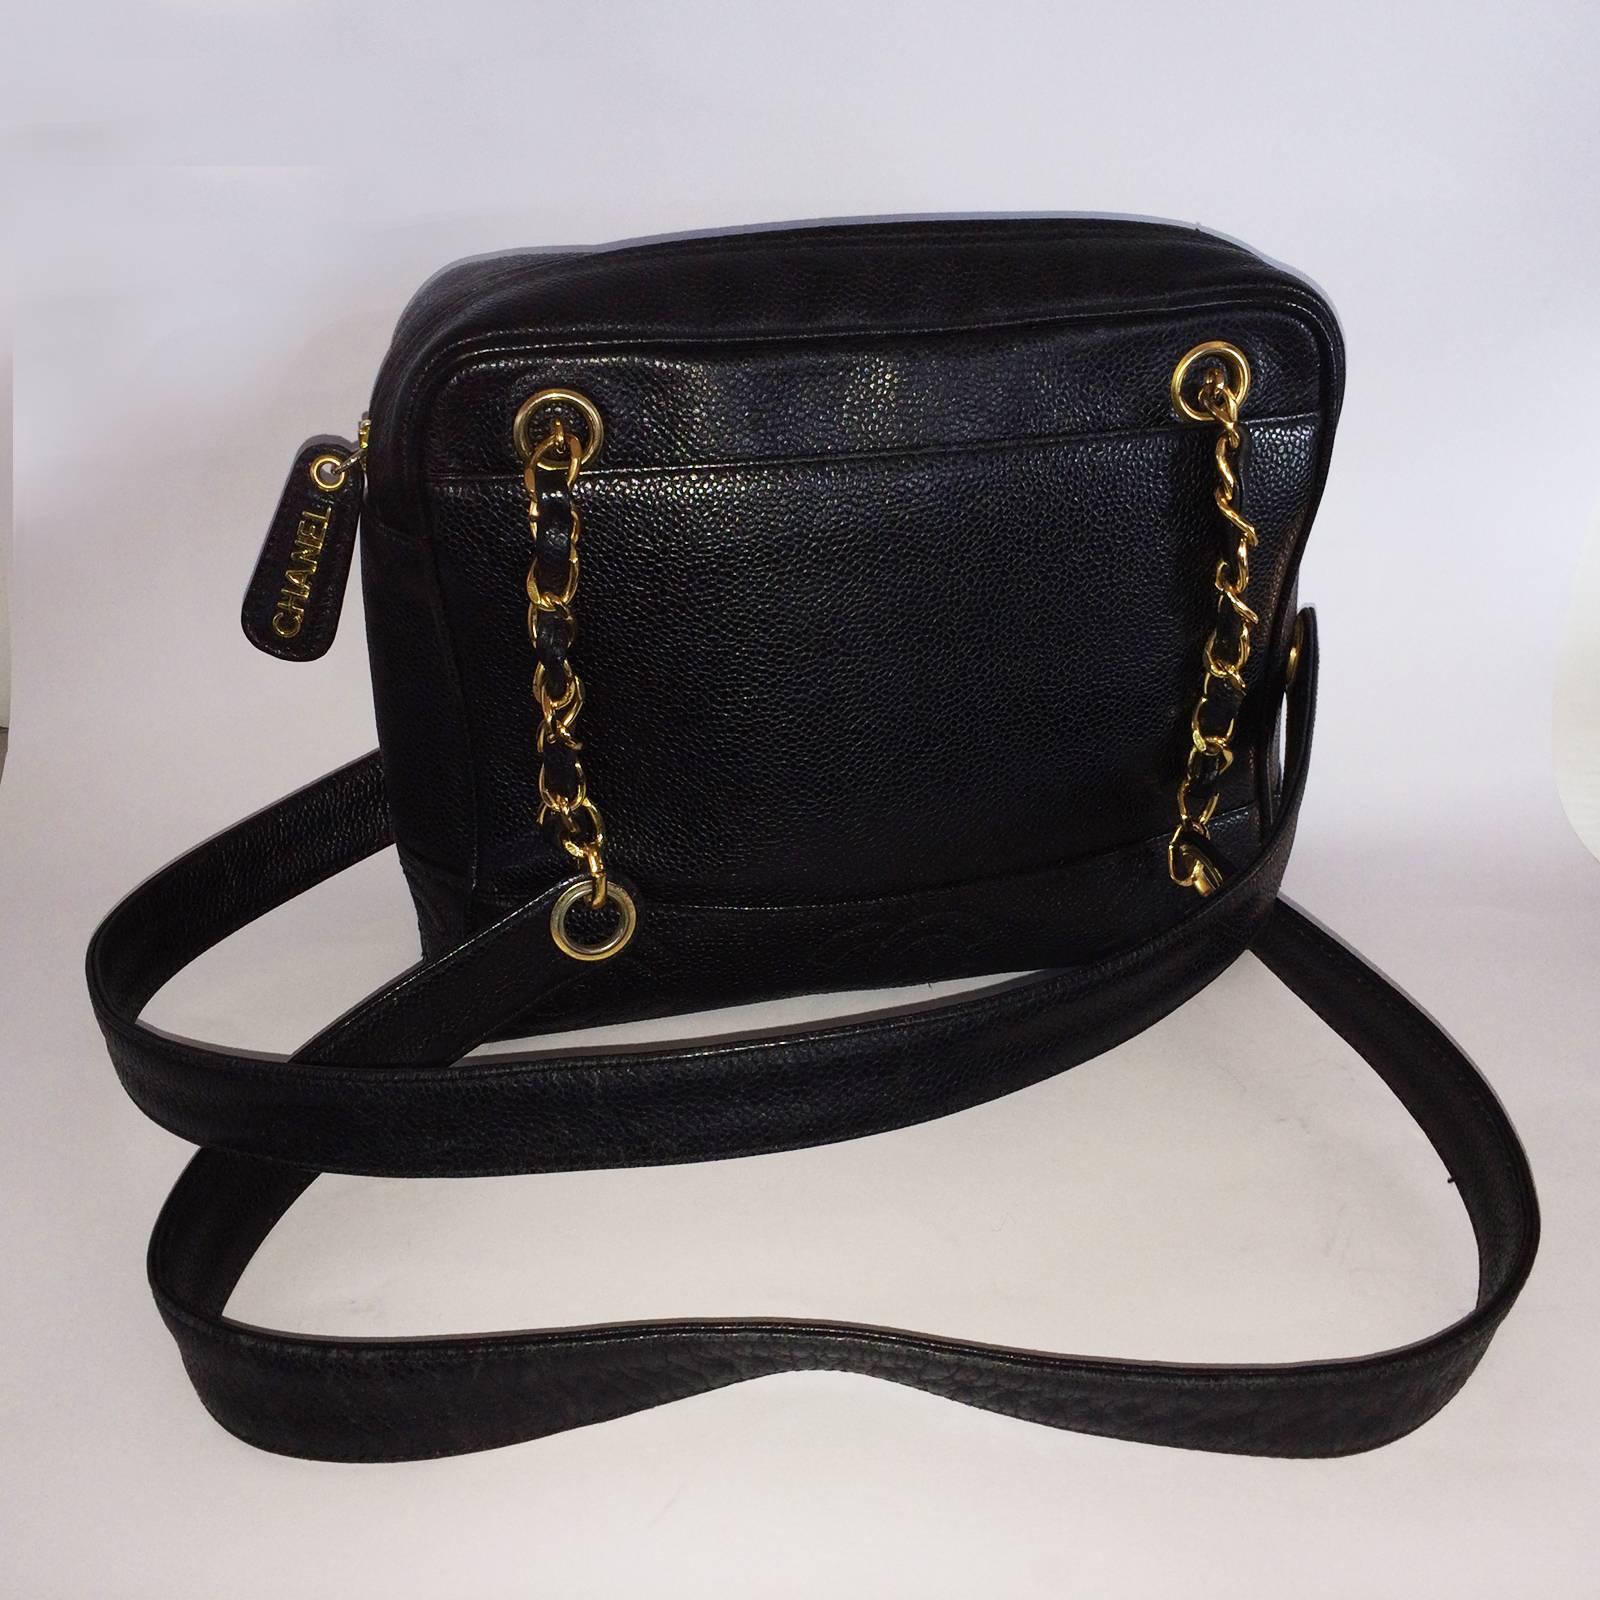 Chanel Handbag in Black Caviar Leather of medium proportions, having a large, exterior deep pocket to front and rear with gilt detail to 4 chains threaded with leather also and longer, shoulder straps to both sides. There is a full “CHANEL” badge to